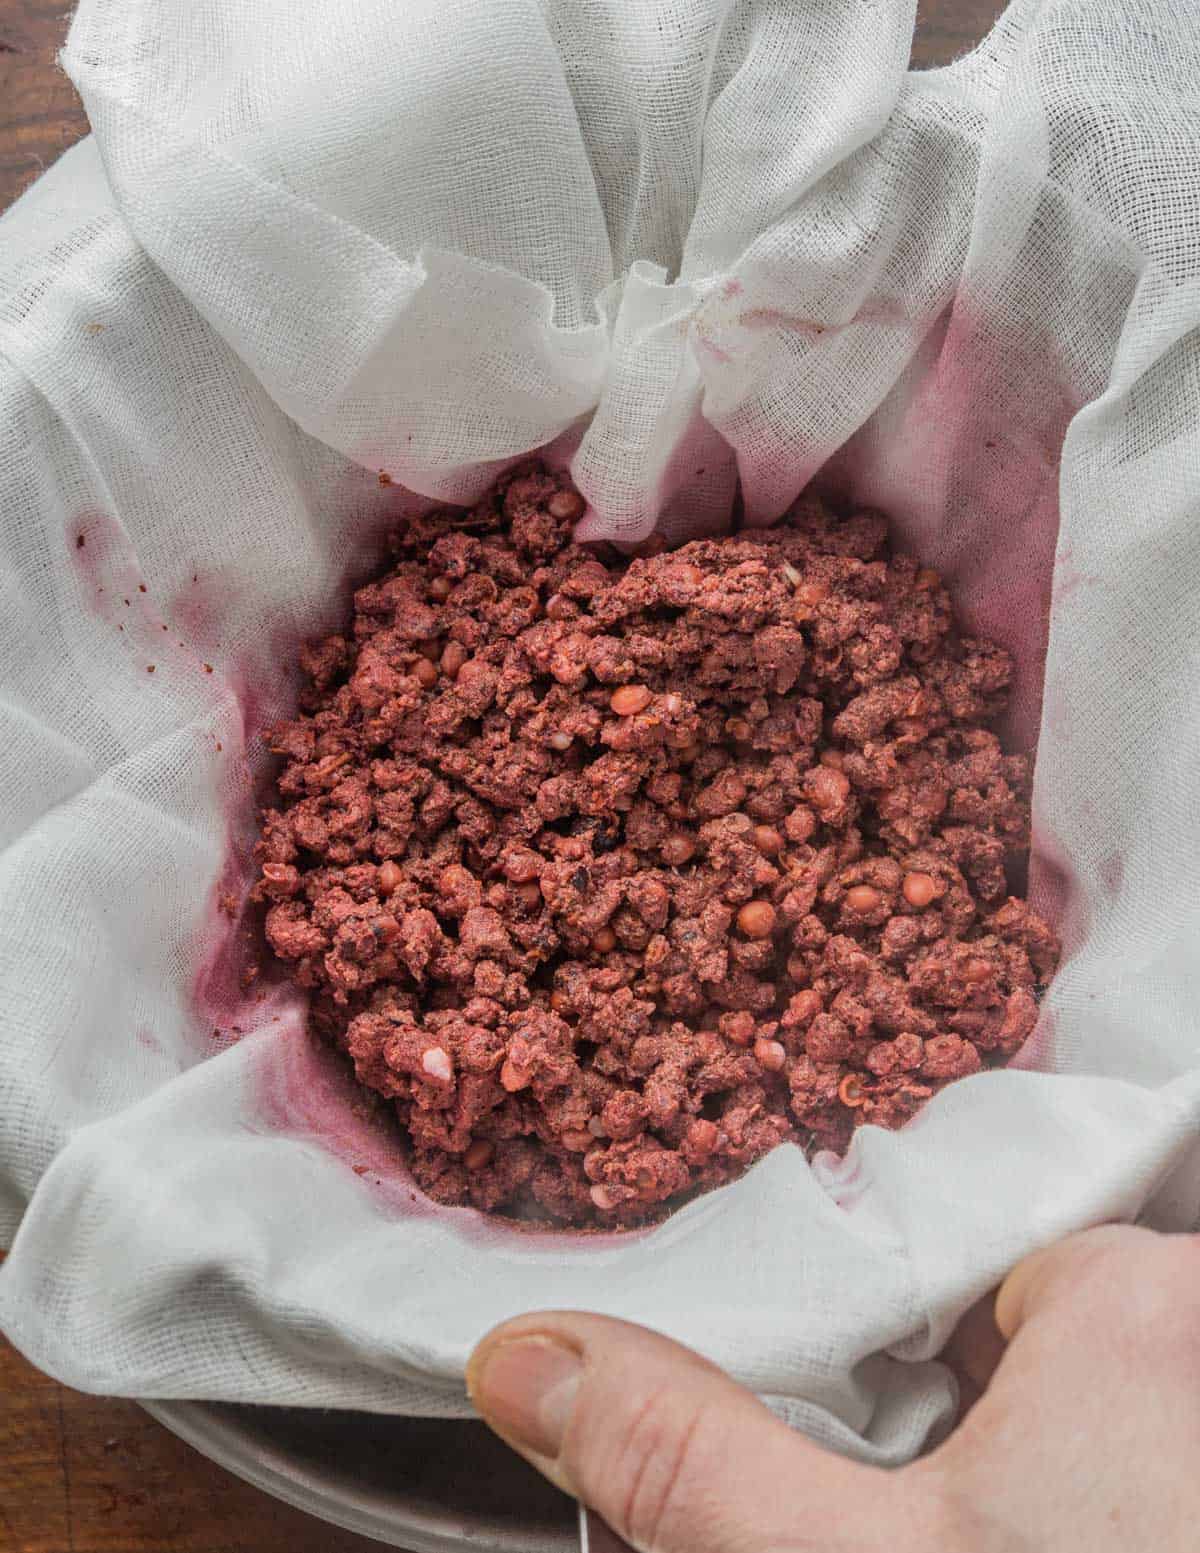 Straining cooked wild cherries through cheesecloth.